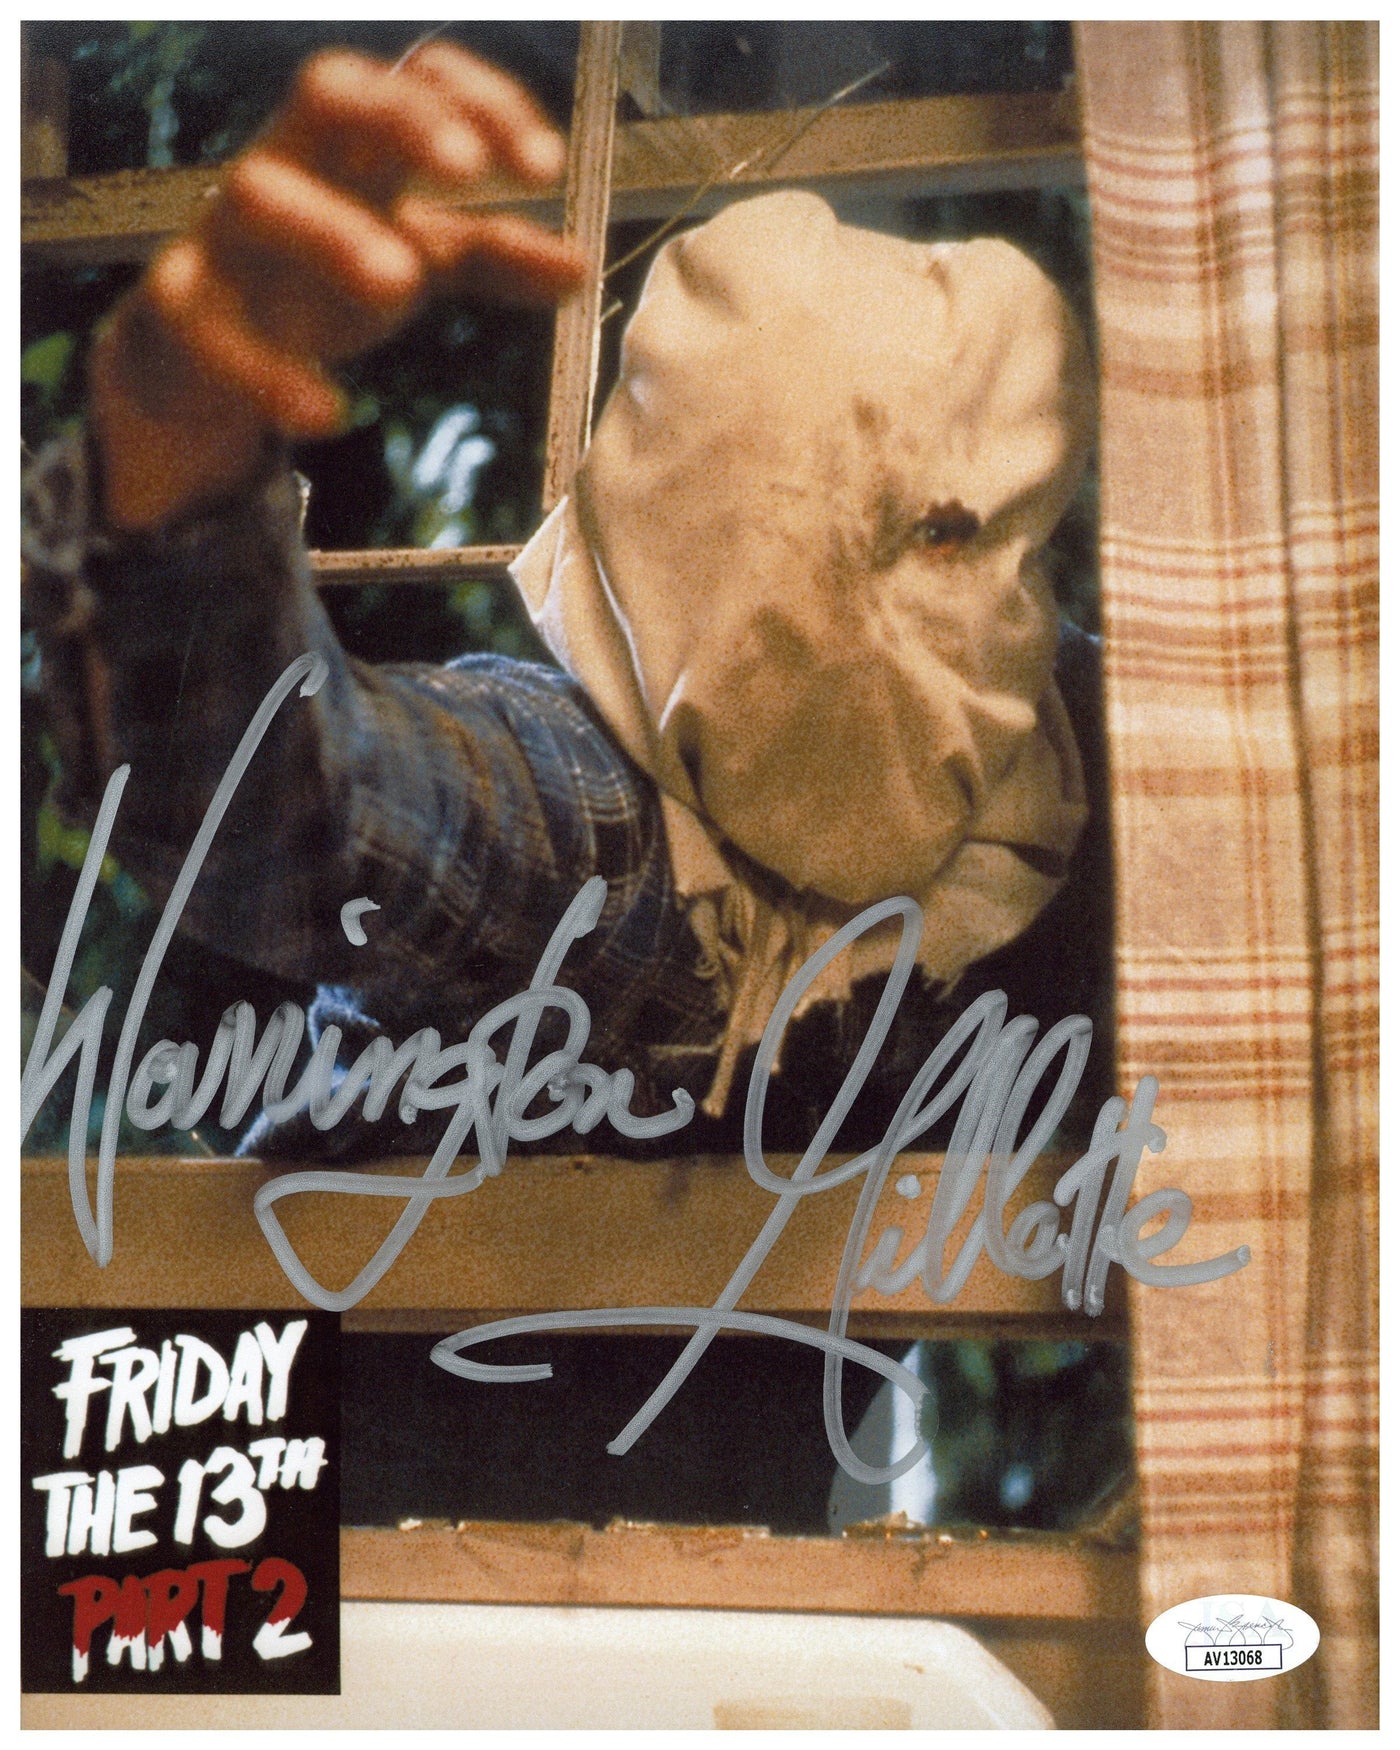 Warrington Gillette Signed 8x10 Photo Friday the 13th Jason Voorhees Autographed JSA 2